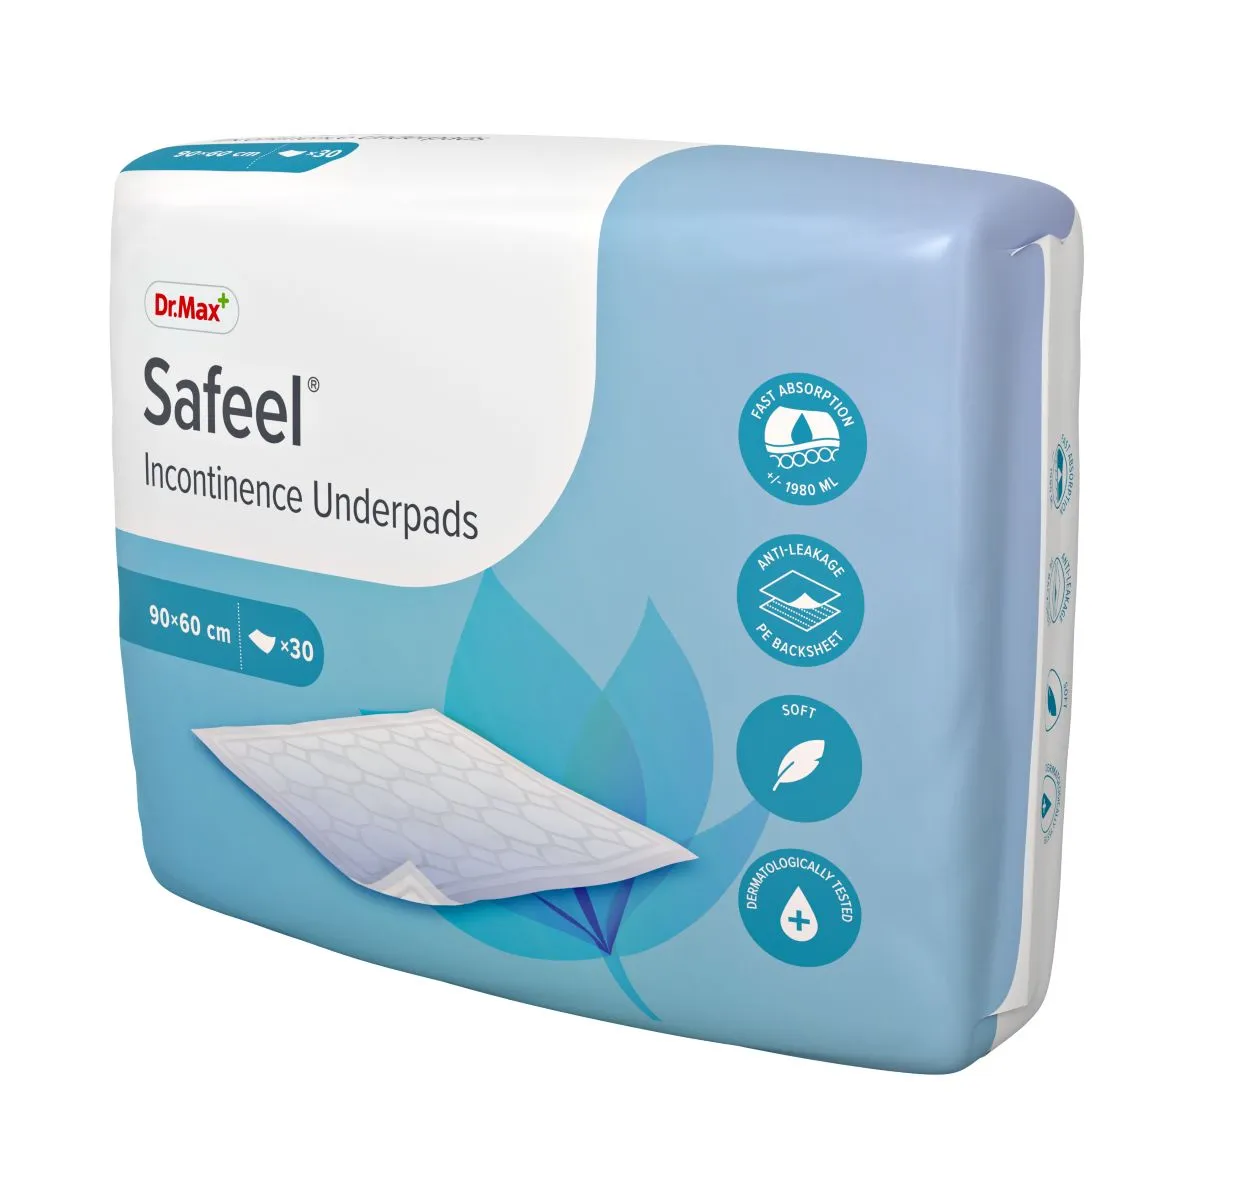 Dr.Max Safeel Incontinence Underpads 90x60 cm